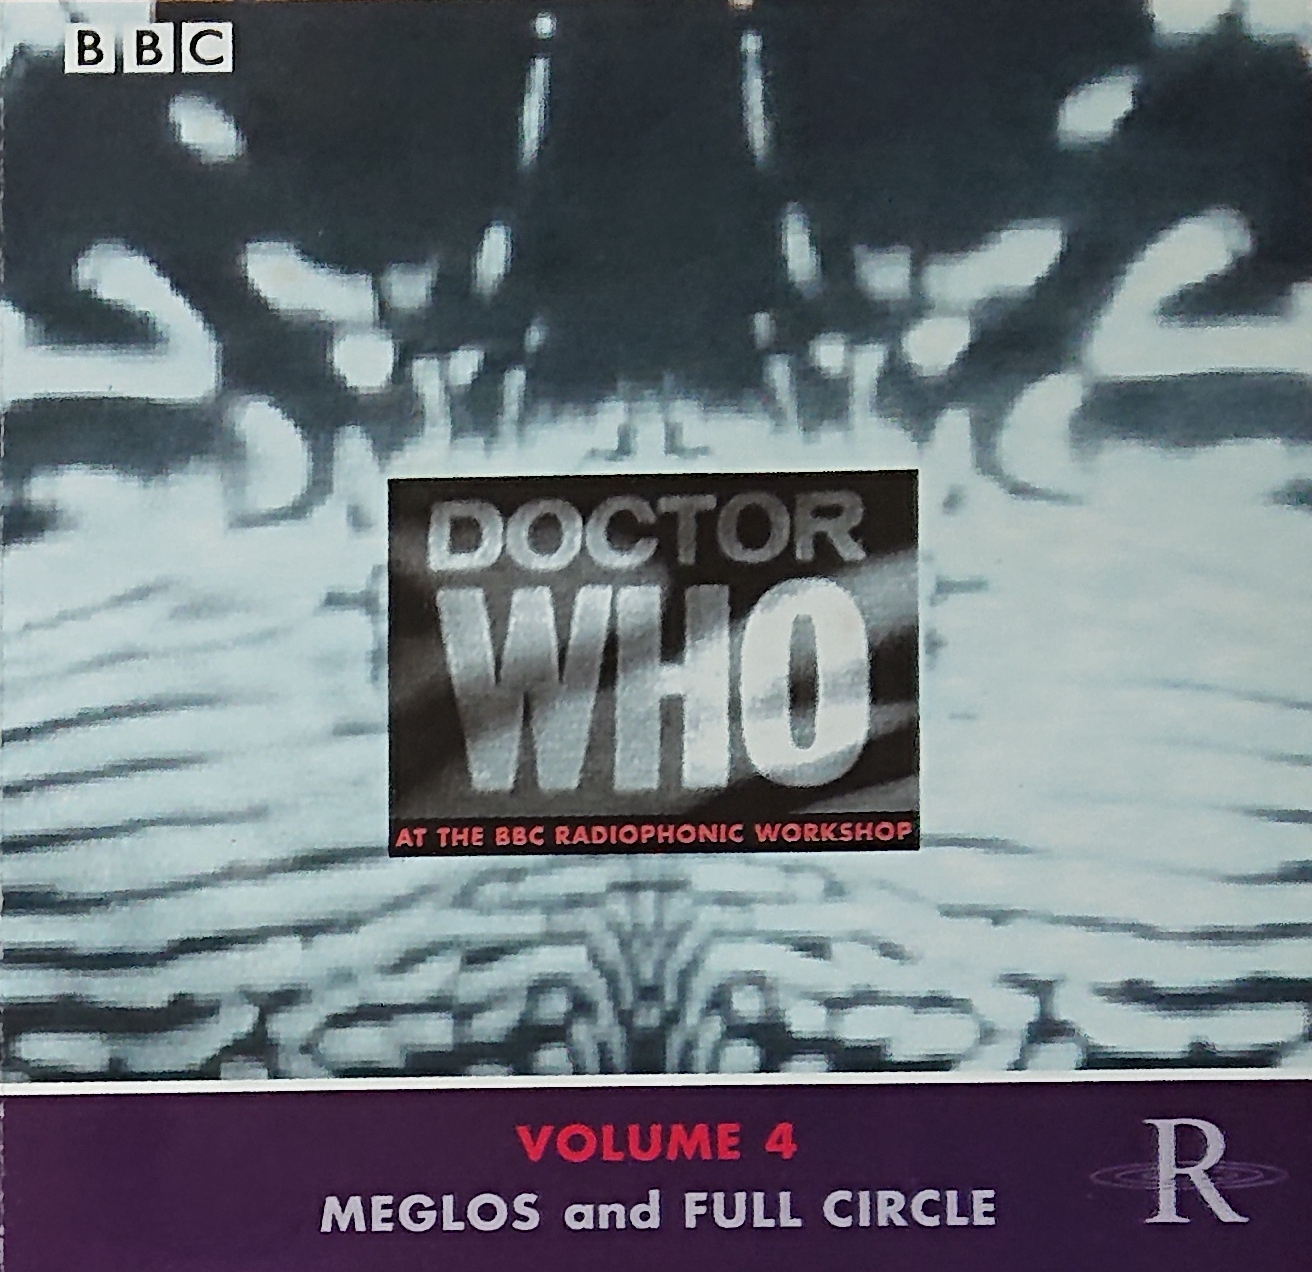 Picture of Doctor Who - At the radiophonic workshop - Volume 4 by artist Various from the BBC cds - Records and Tapes library